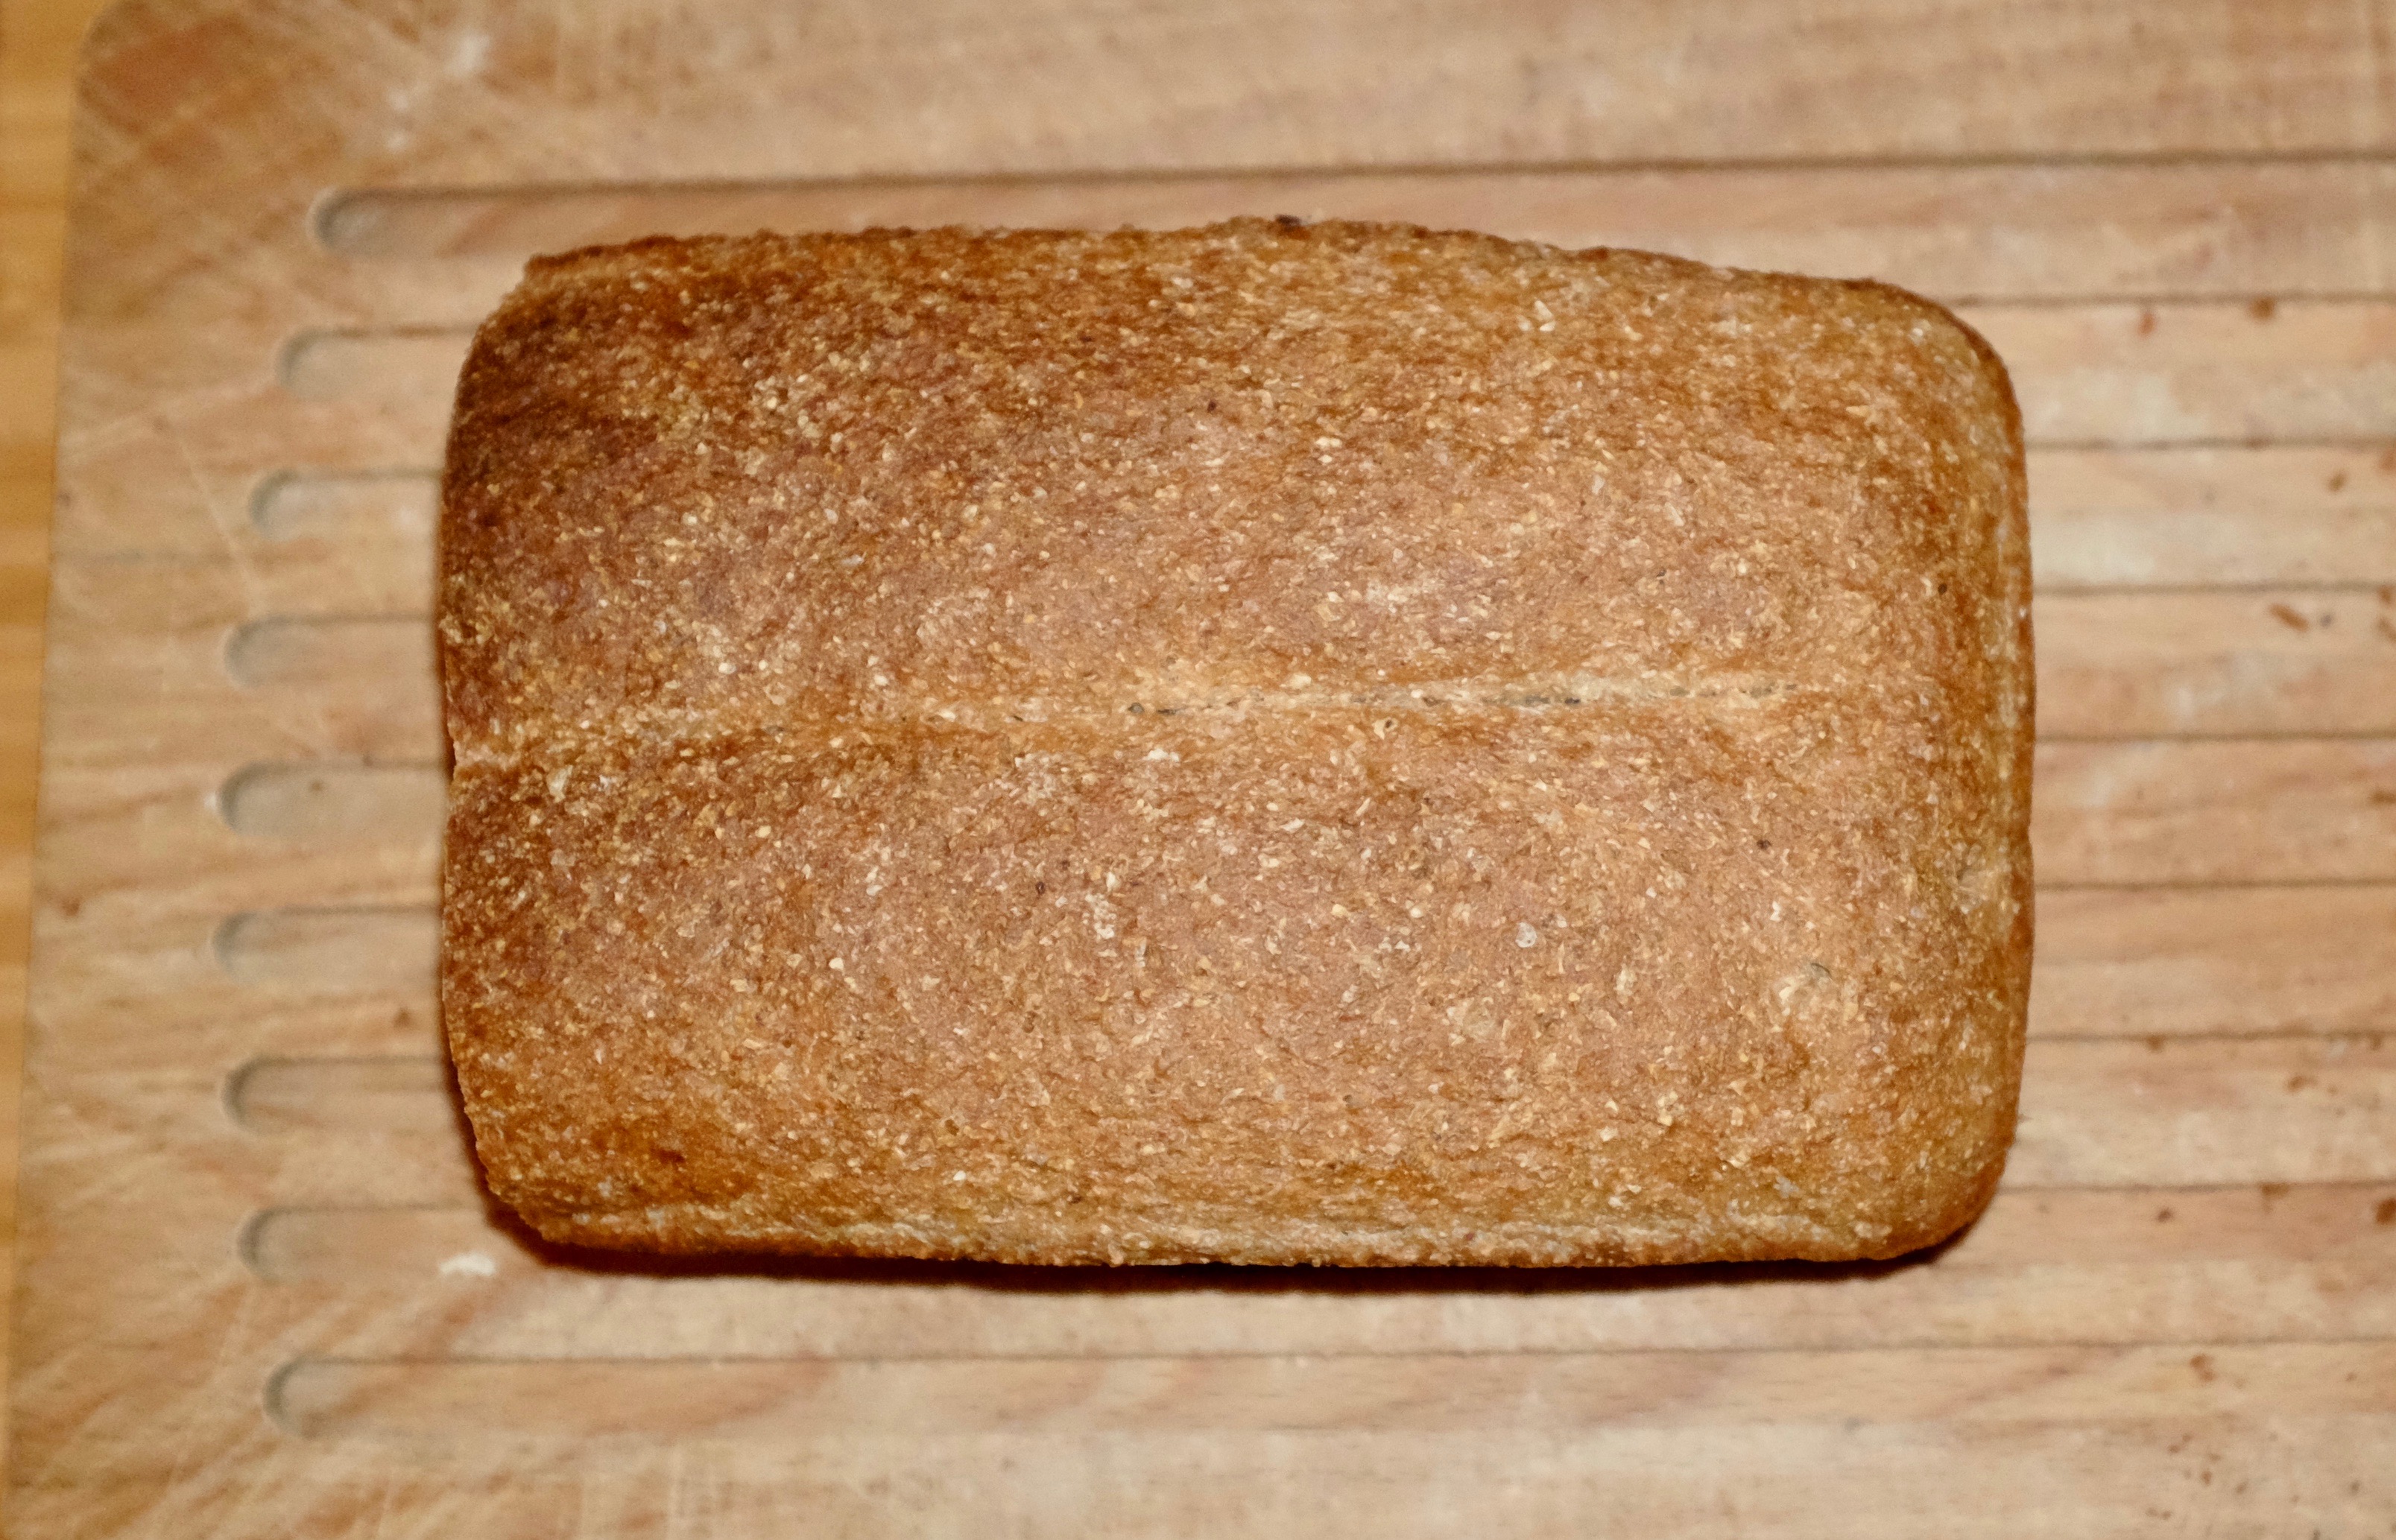 The crust of the bread